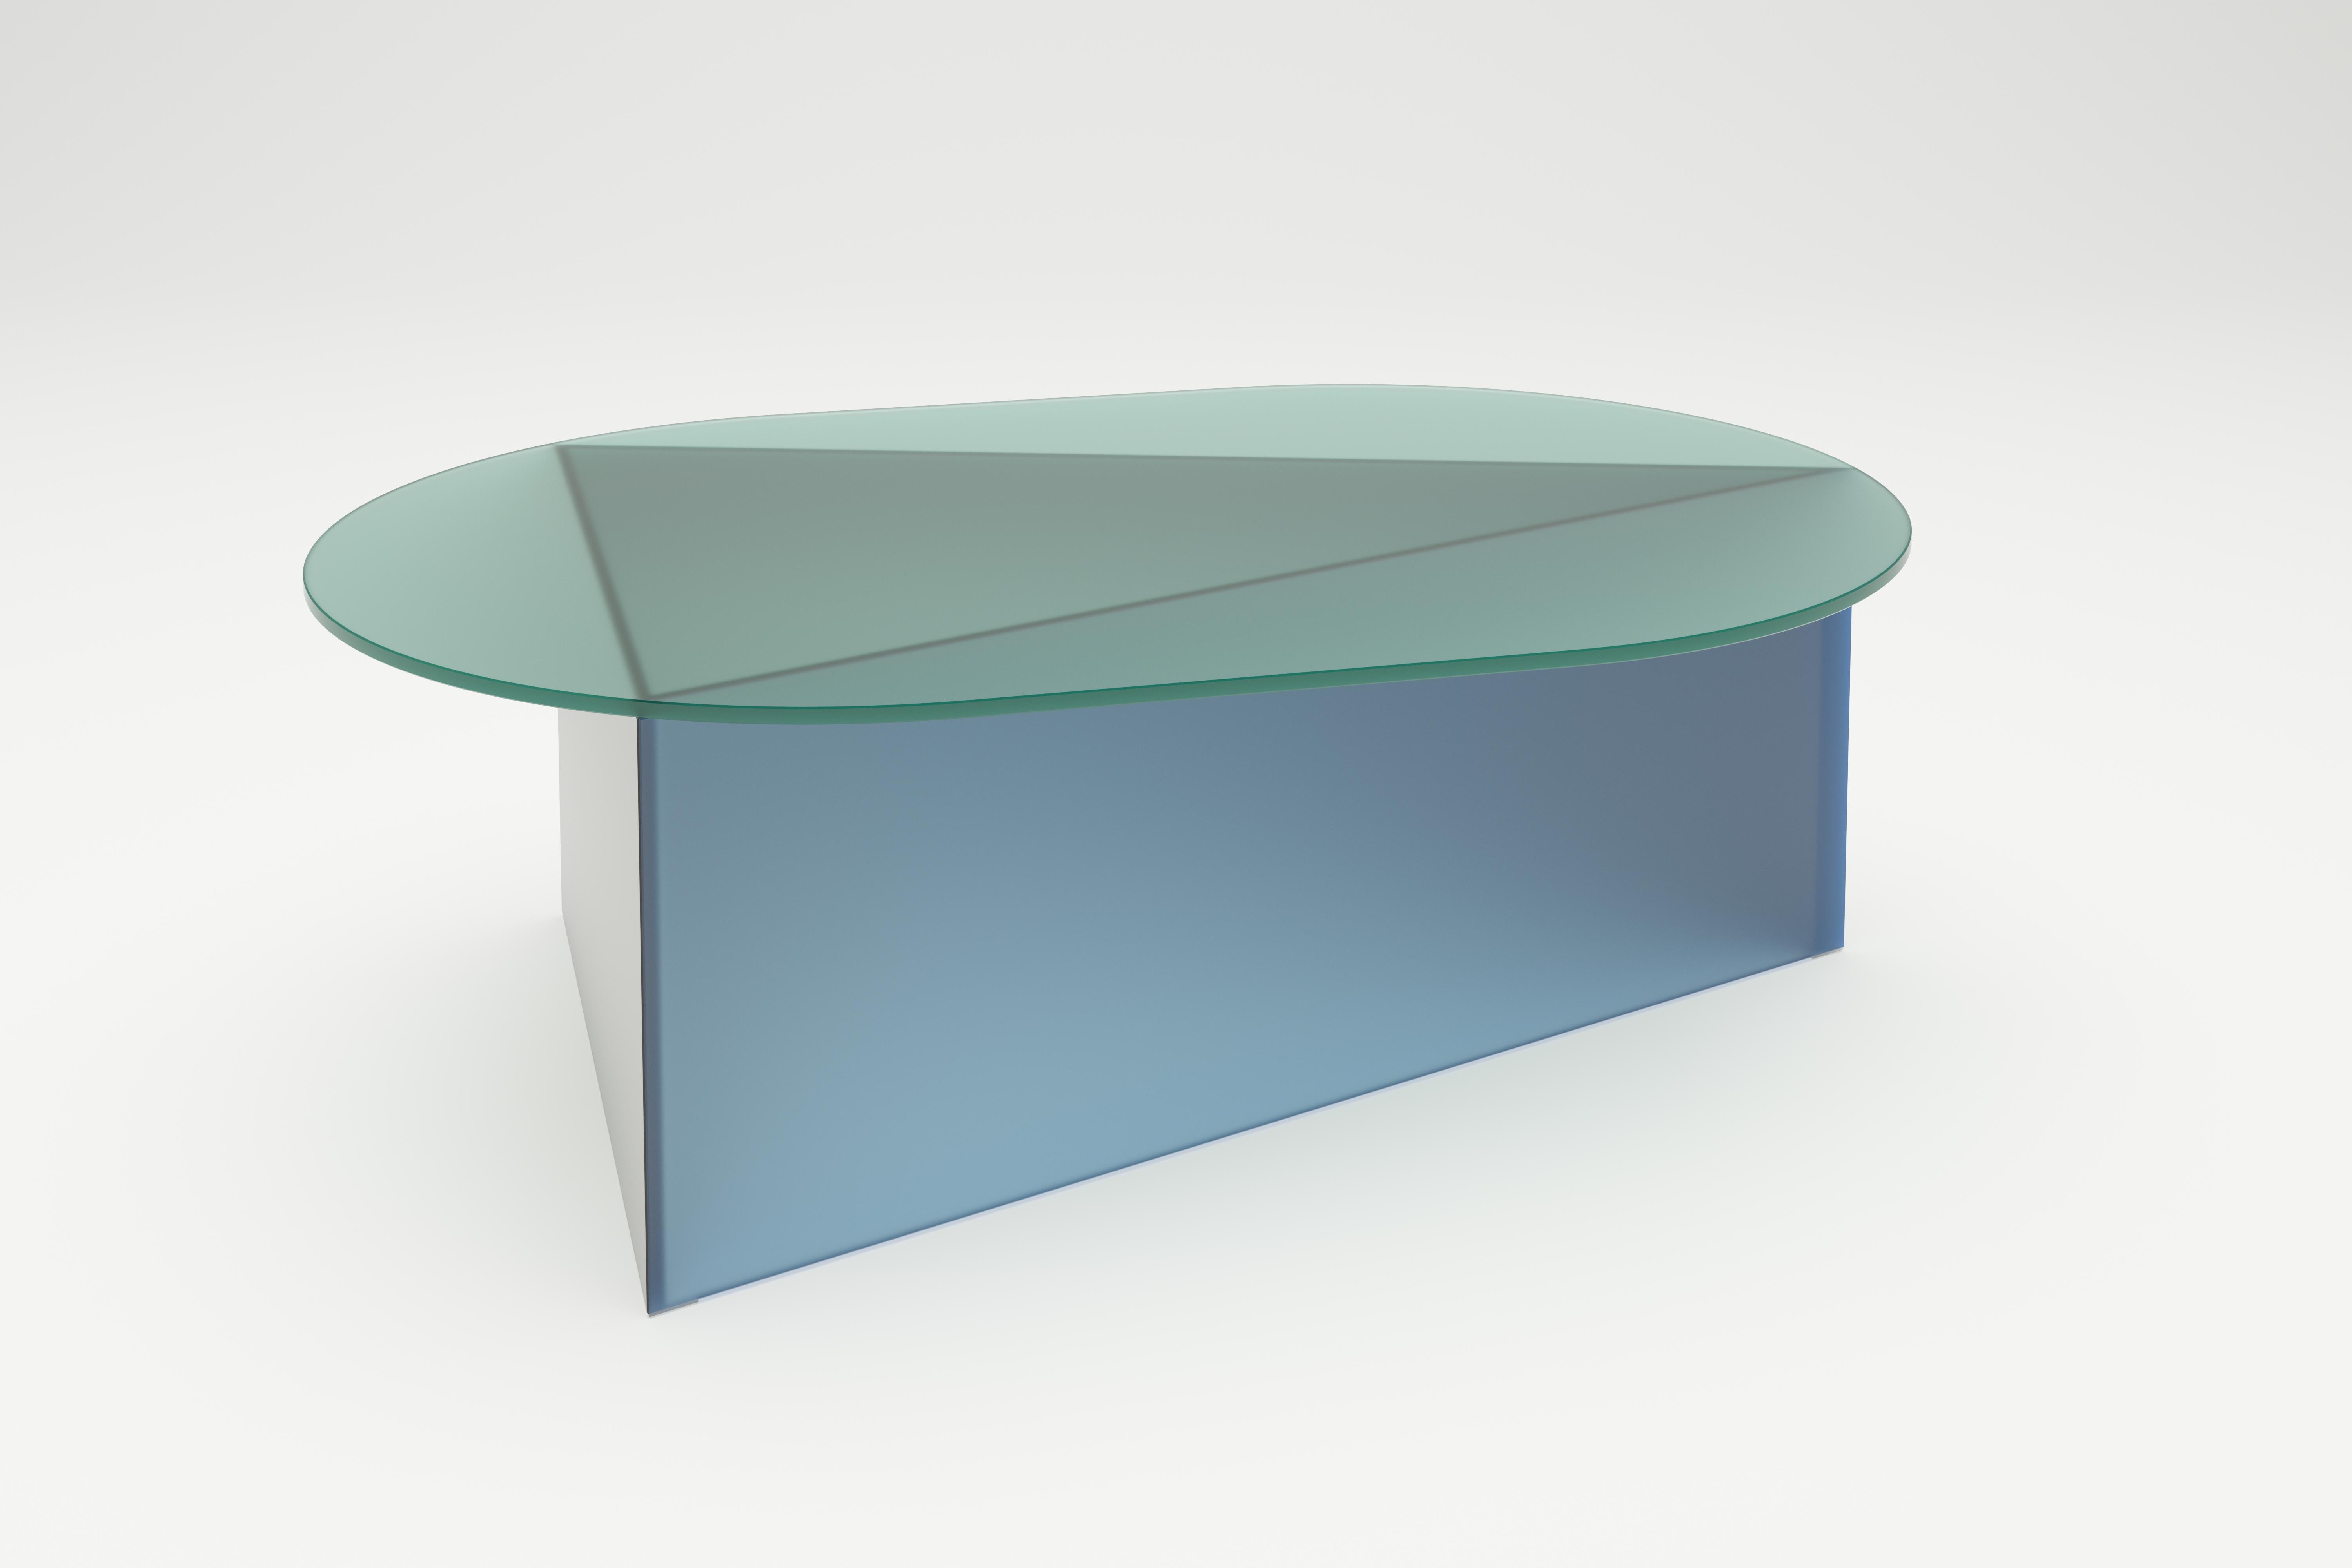 Satin Glass Prisma Oblong 105 coffee table by Sebastian Scherer
Dimensions: D105 x W70 x H35 cm
Materials: Solid coloured glass.
Weight: 36.2 kg.
Also Available: Glass: clear white / clear green / clear blue / clear bronze / clear black / satin